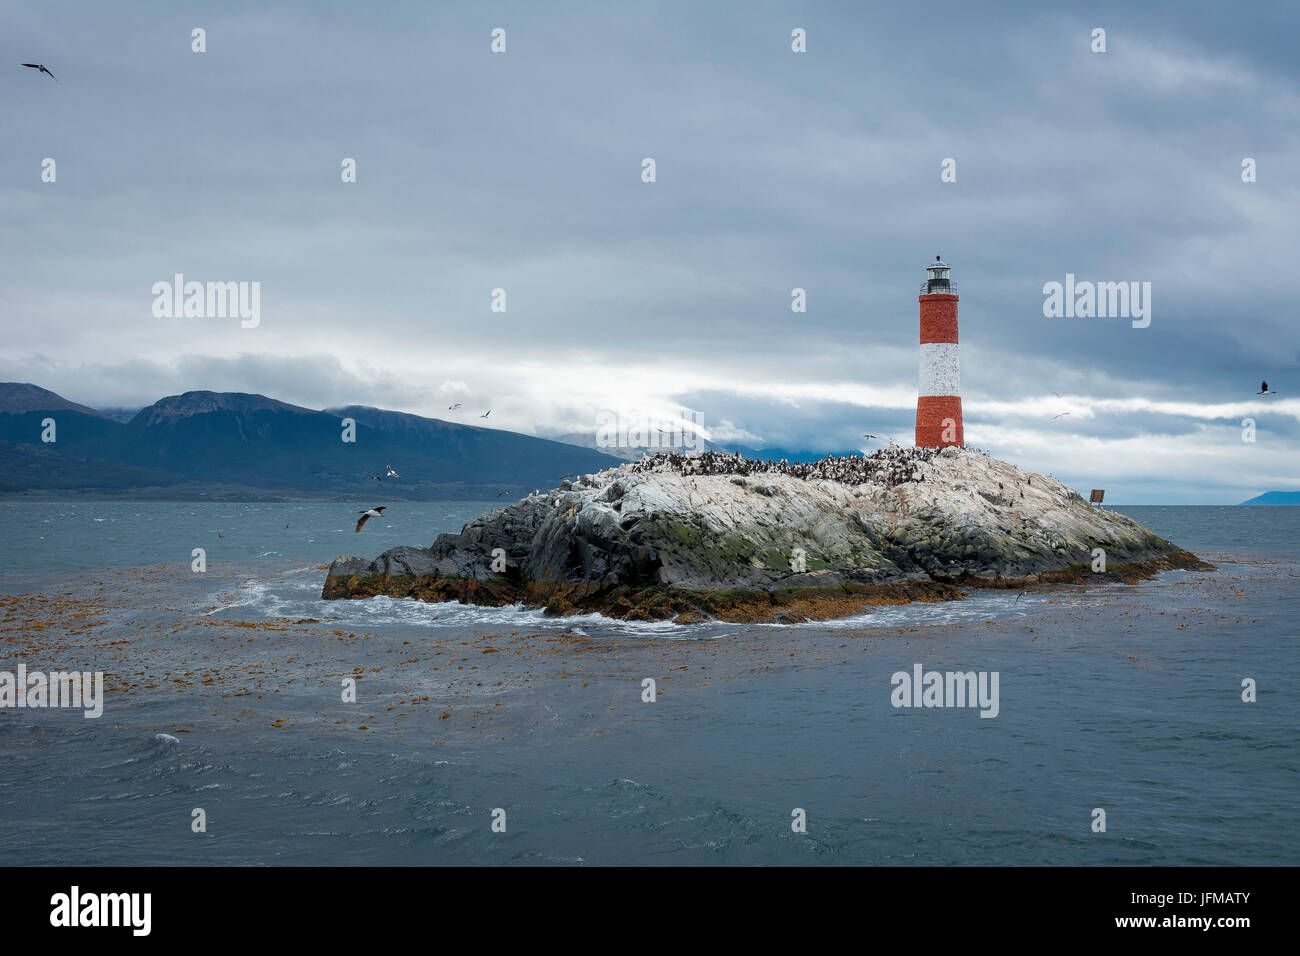 Argentina, Patagonia e Tierra del Fuego National Park, Ushuaia, Canale del Beagle, Les Eclaireurs Lighthouse Foto Stock